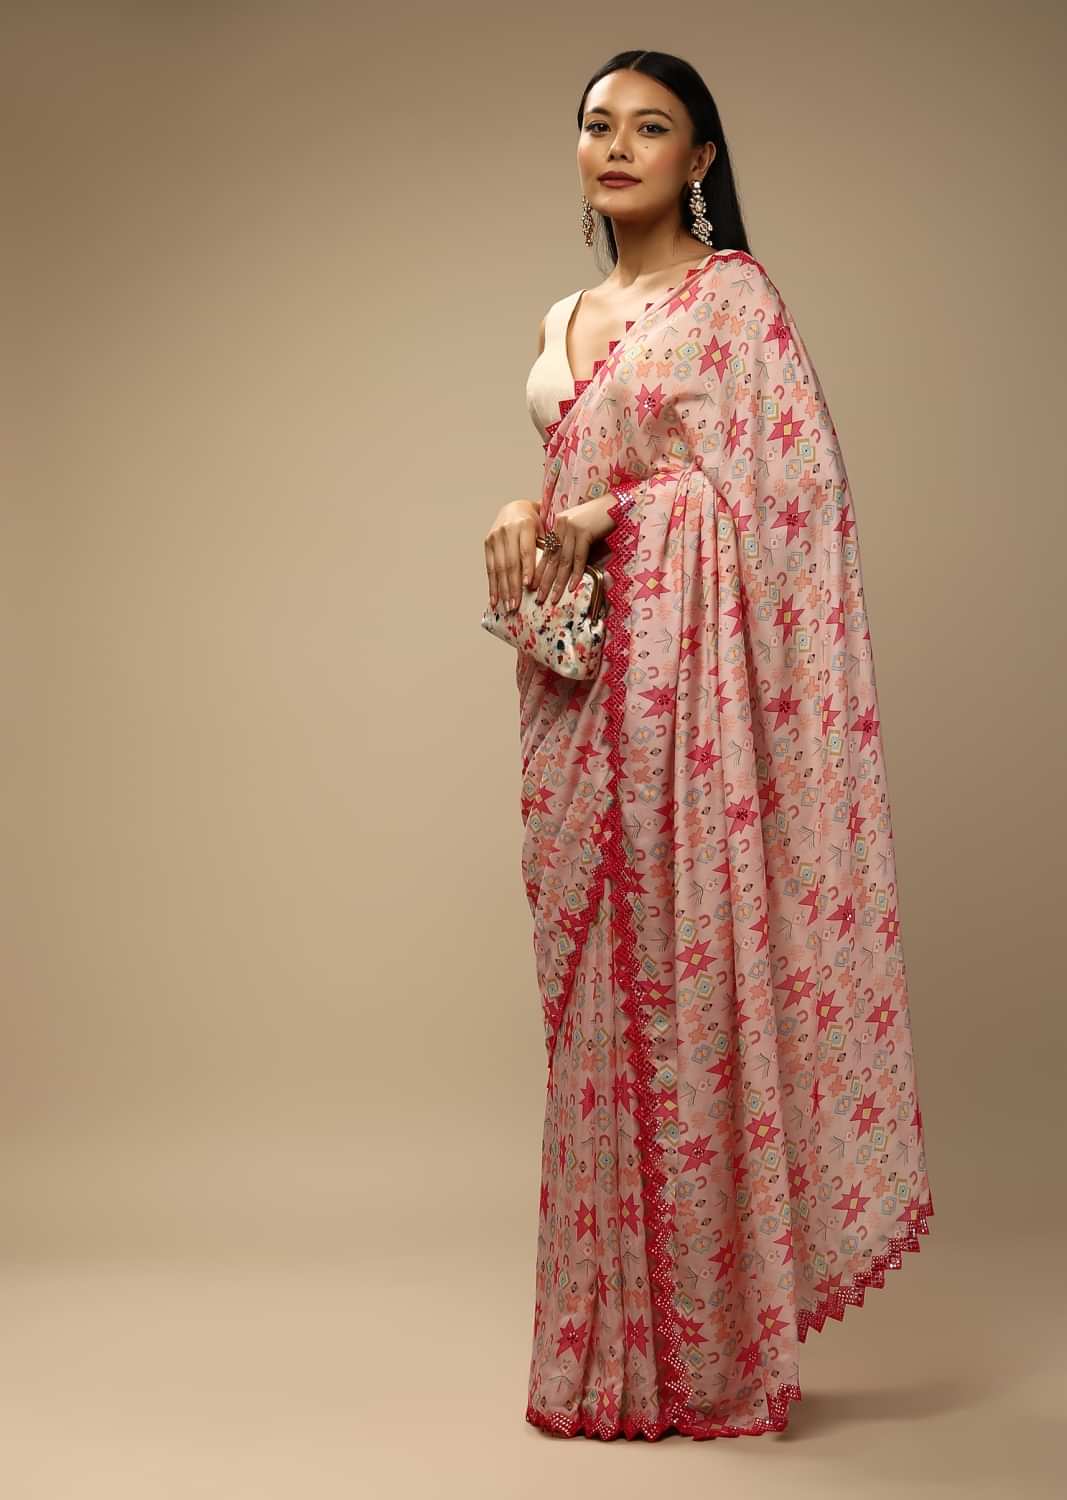 English Rose Pink Saree In Cotton Silk With Self Stripes And Multi Colored Print In Geometric And Abstract Motif